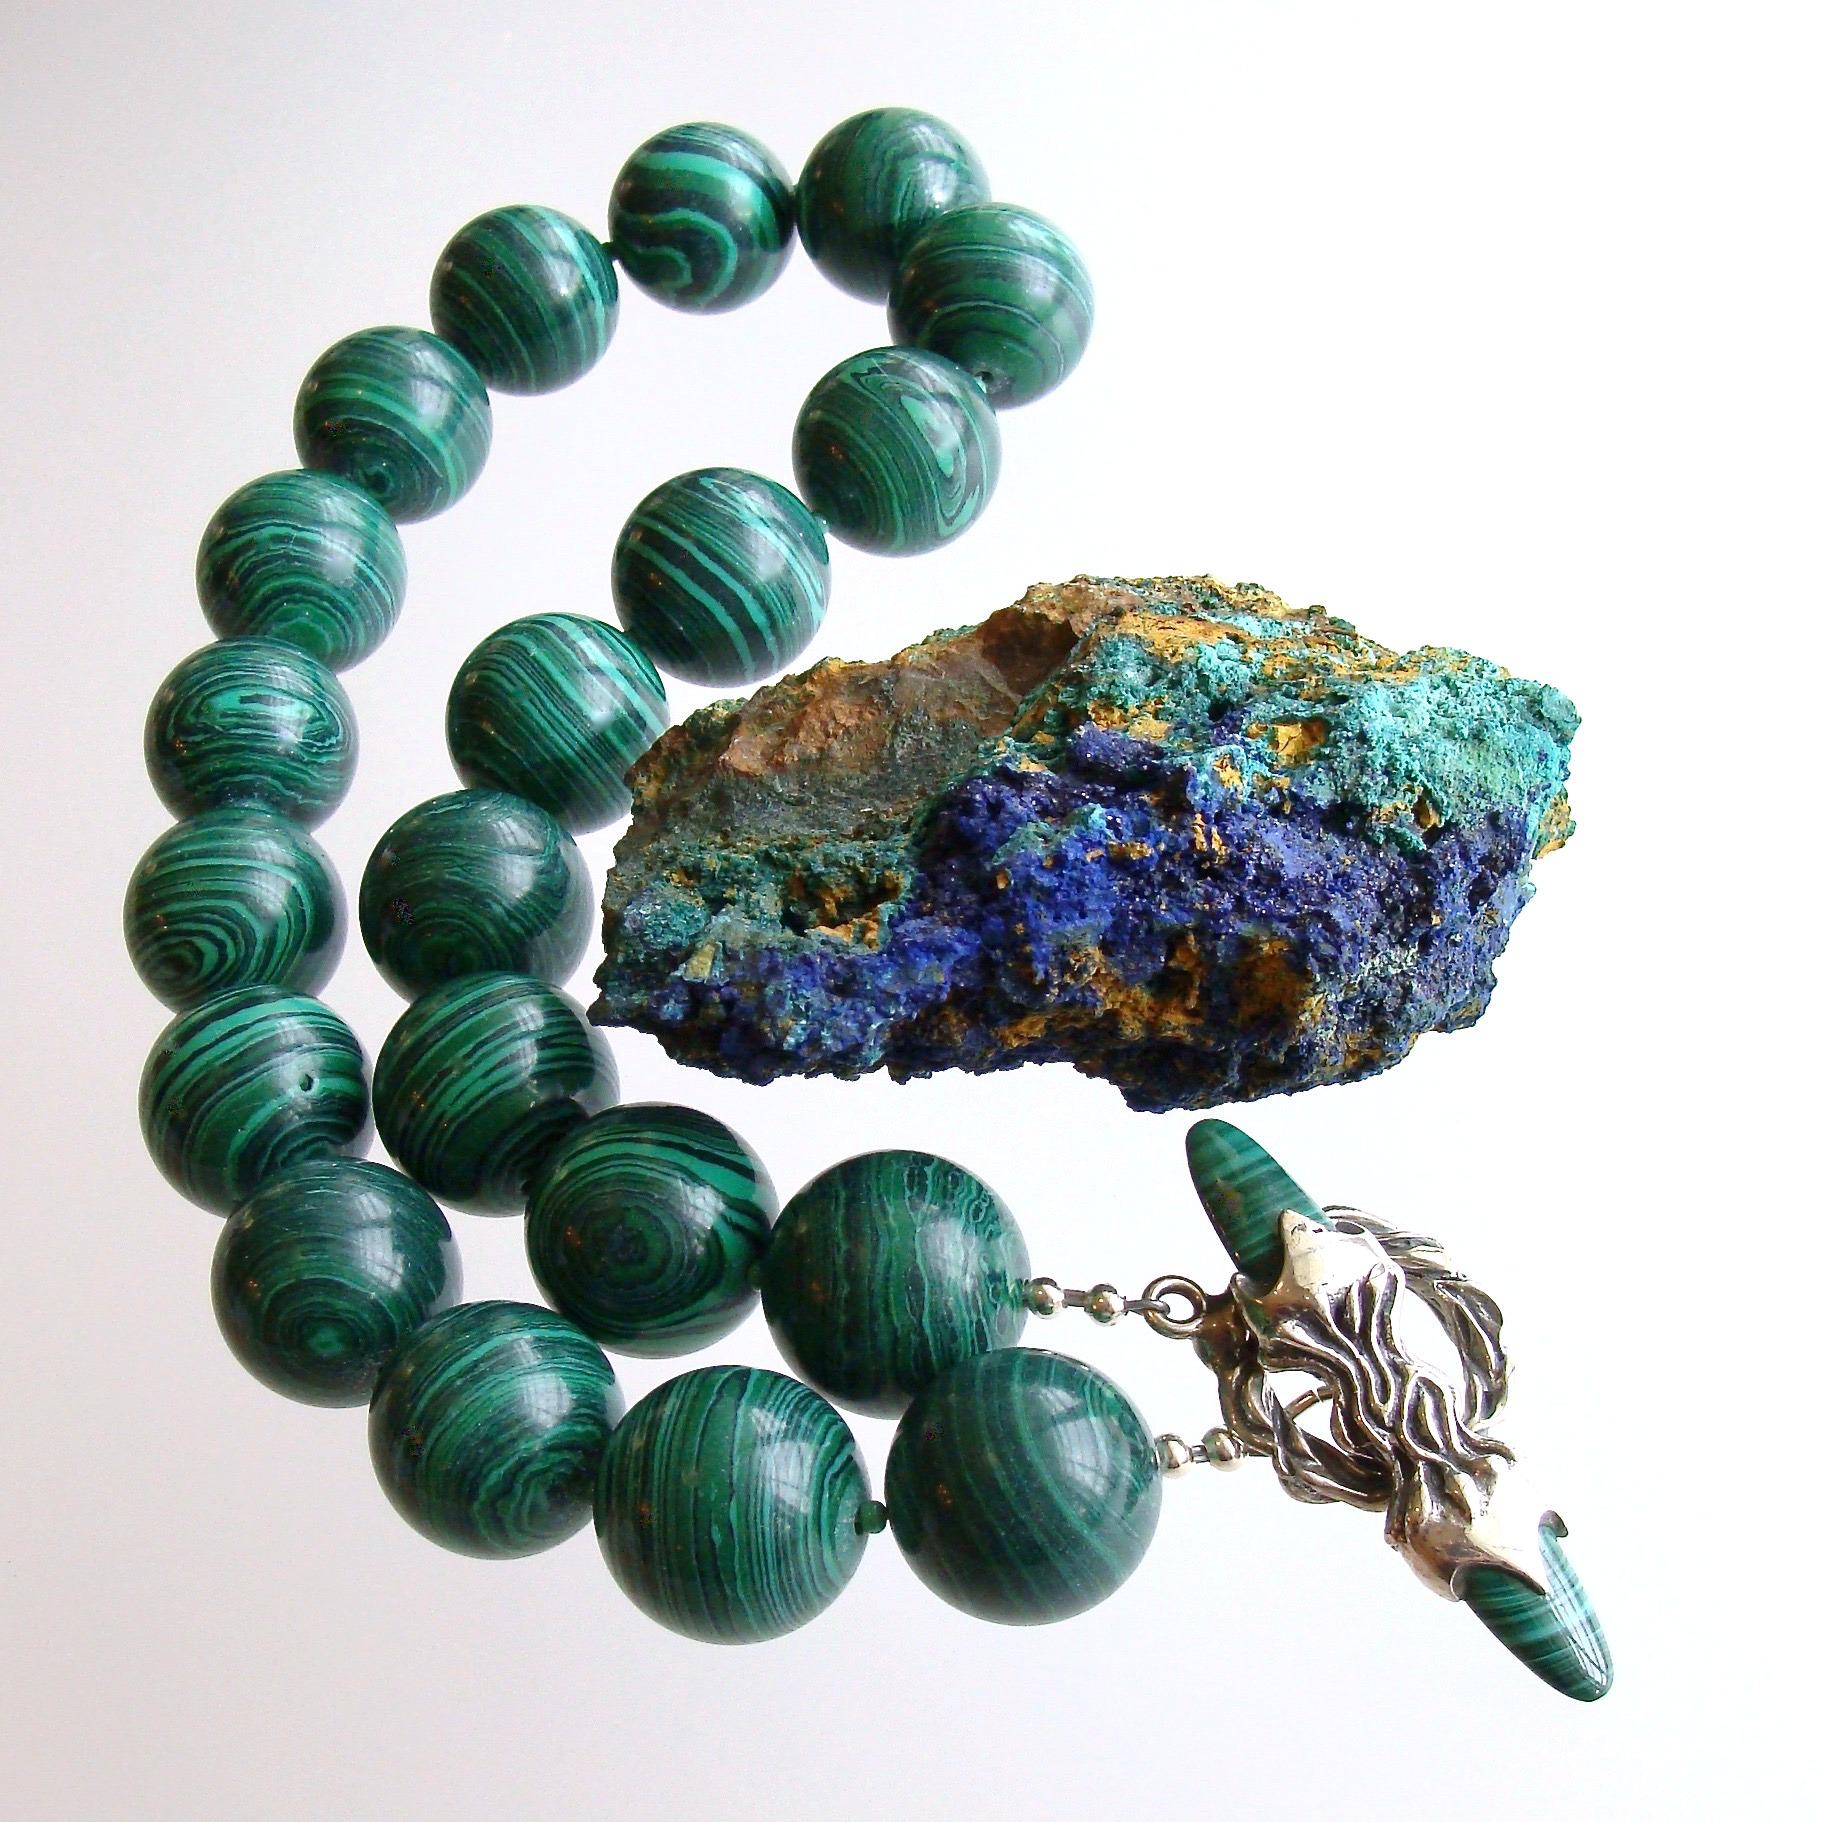 A stunning suite of luxe 19mm malachite beads has been transformed into a dramatic statement choker necklace for Winter.  The swirling black and emerald green colors of the stones are accented with the addition of an organic sterling silver and